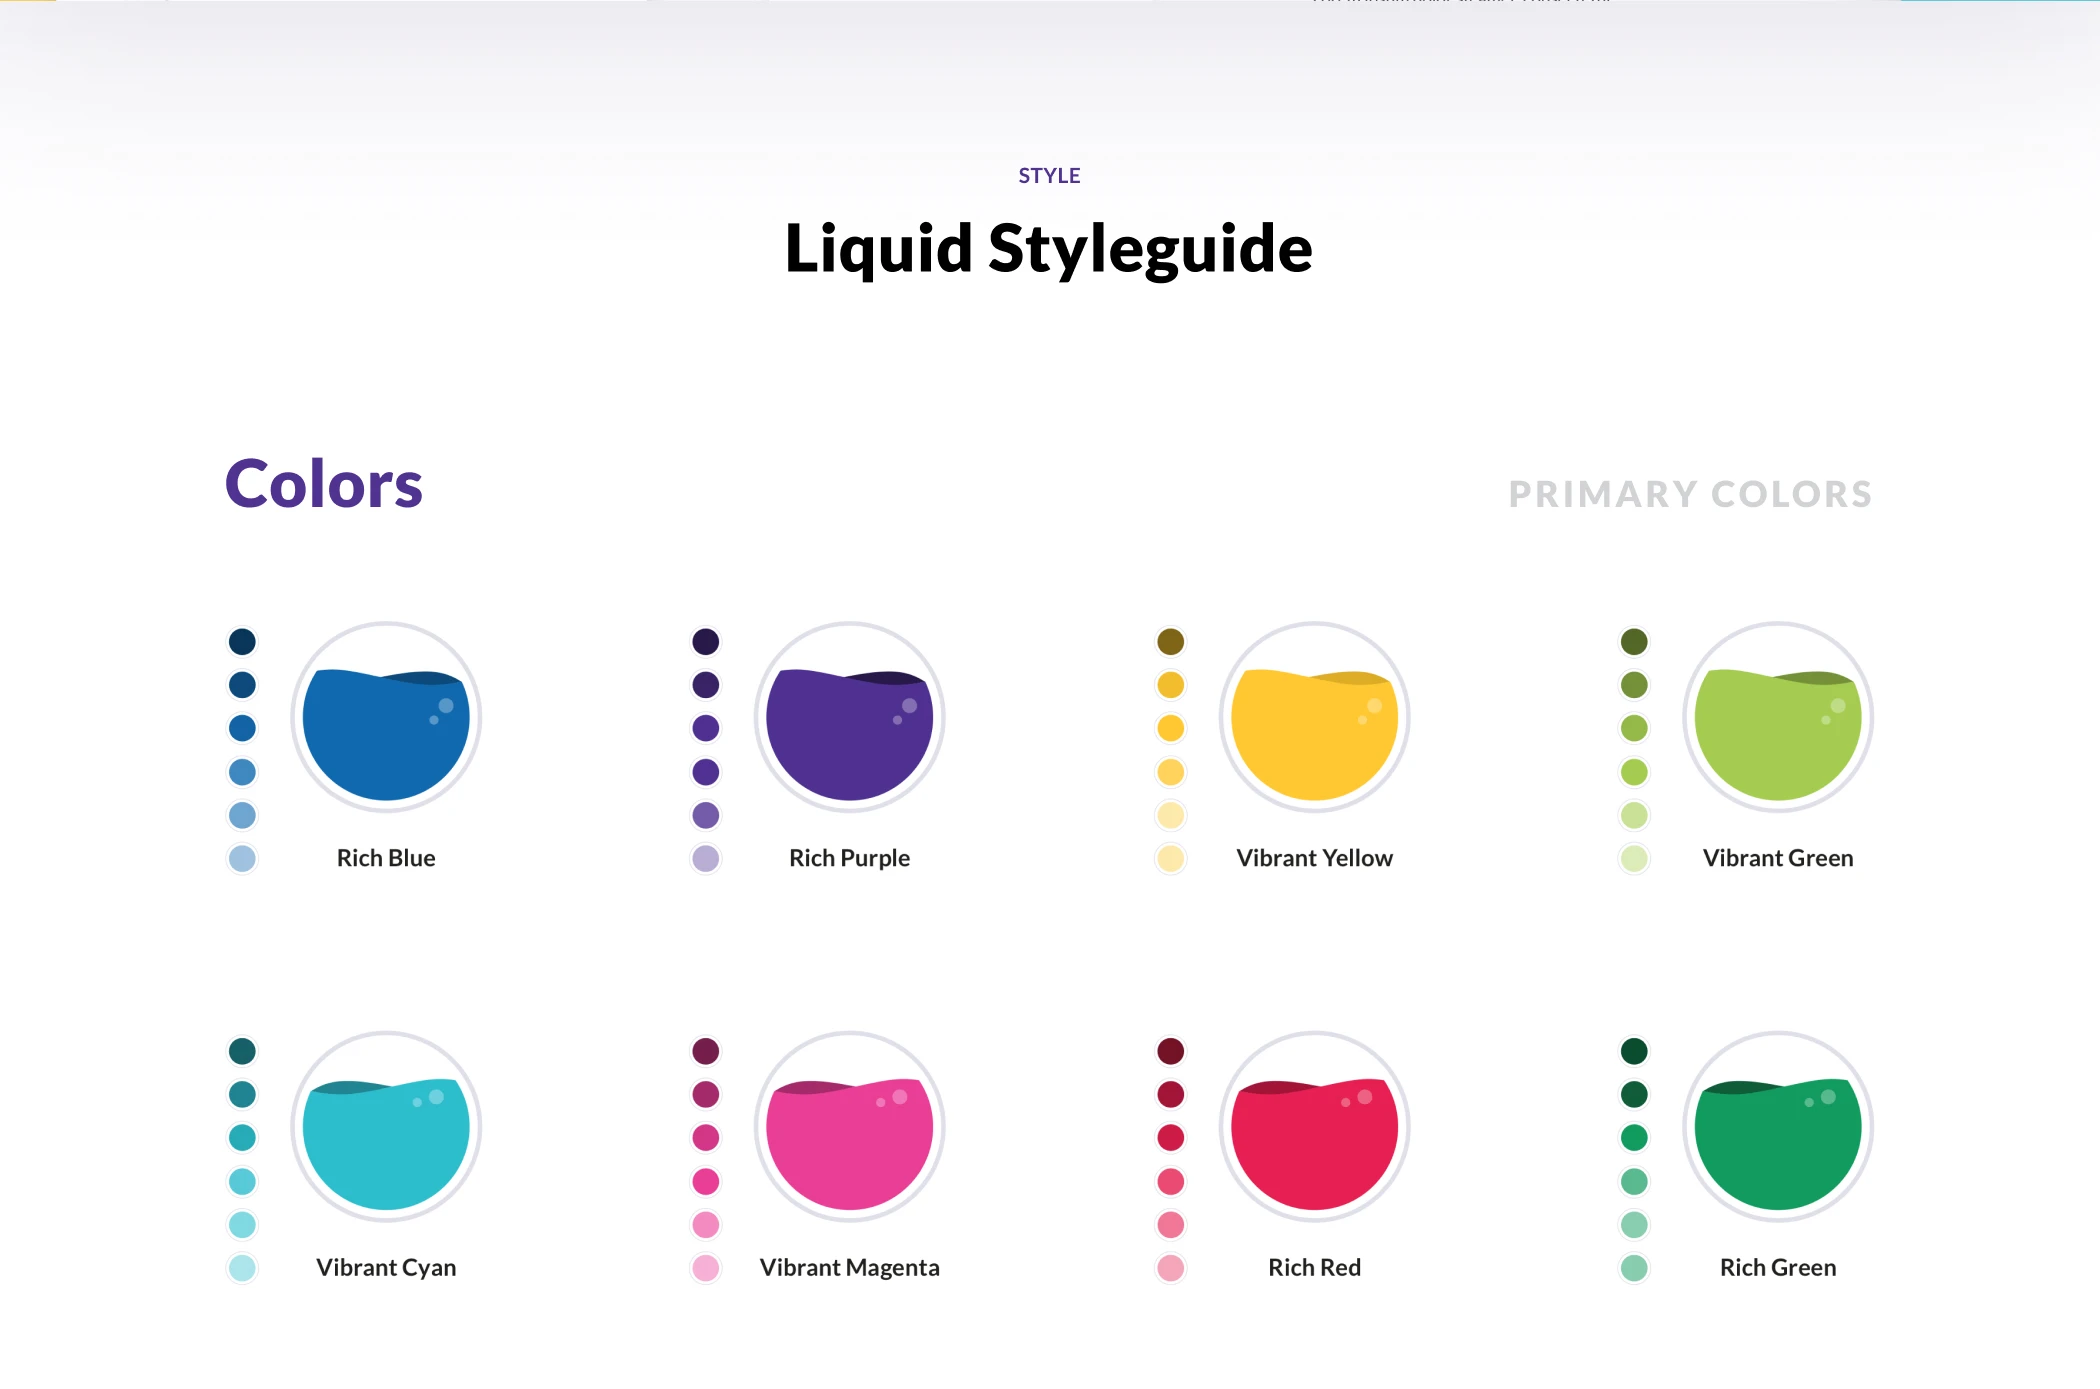 Liquid Design System - Use Liquid to create and develop digital products to make science faster, treatments more personalized, and everyday work more enjoyable.